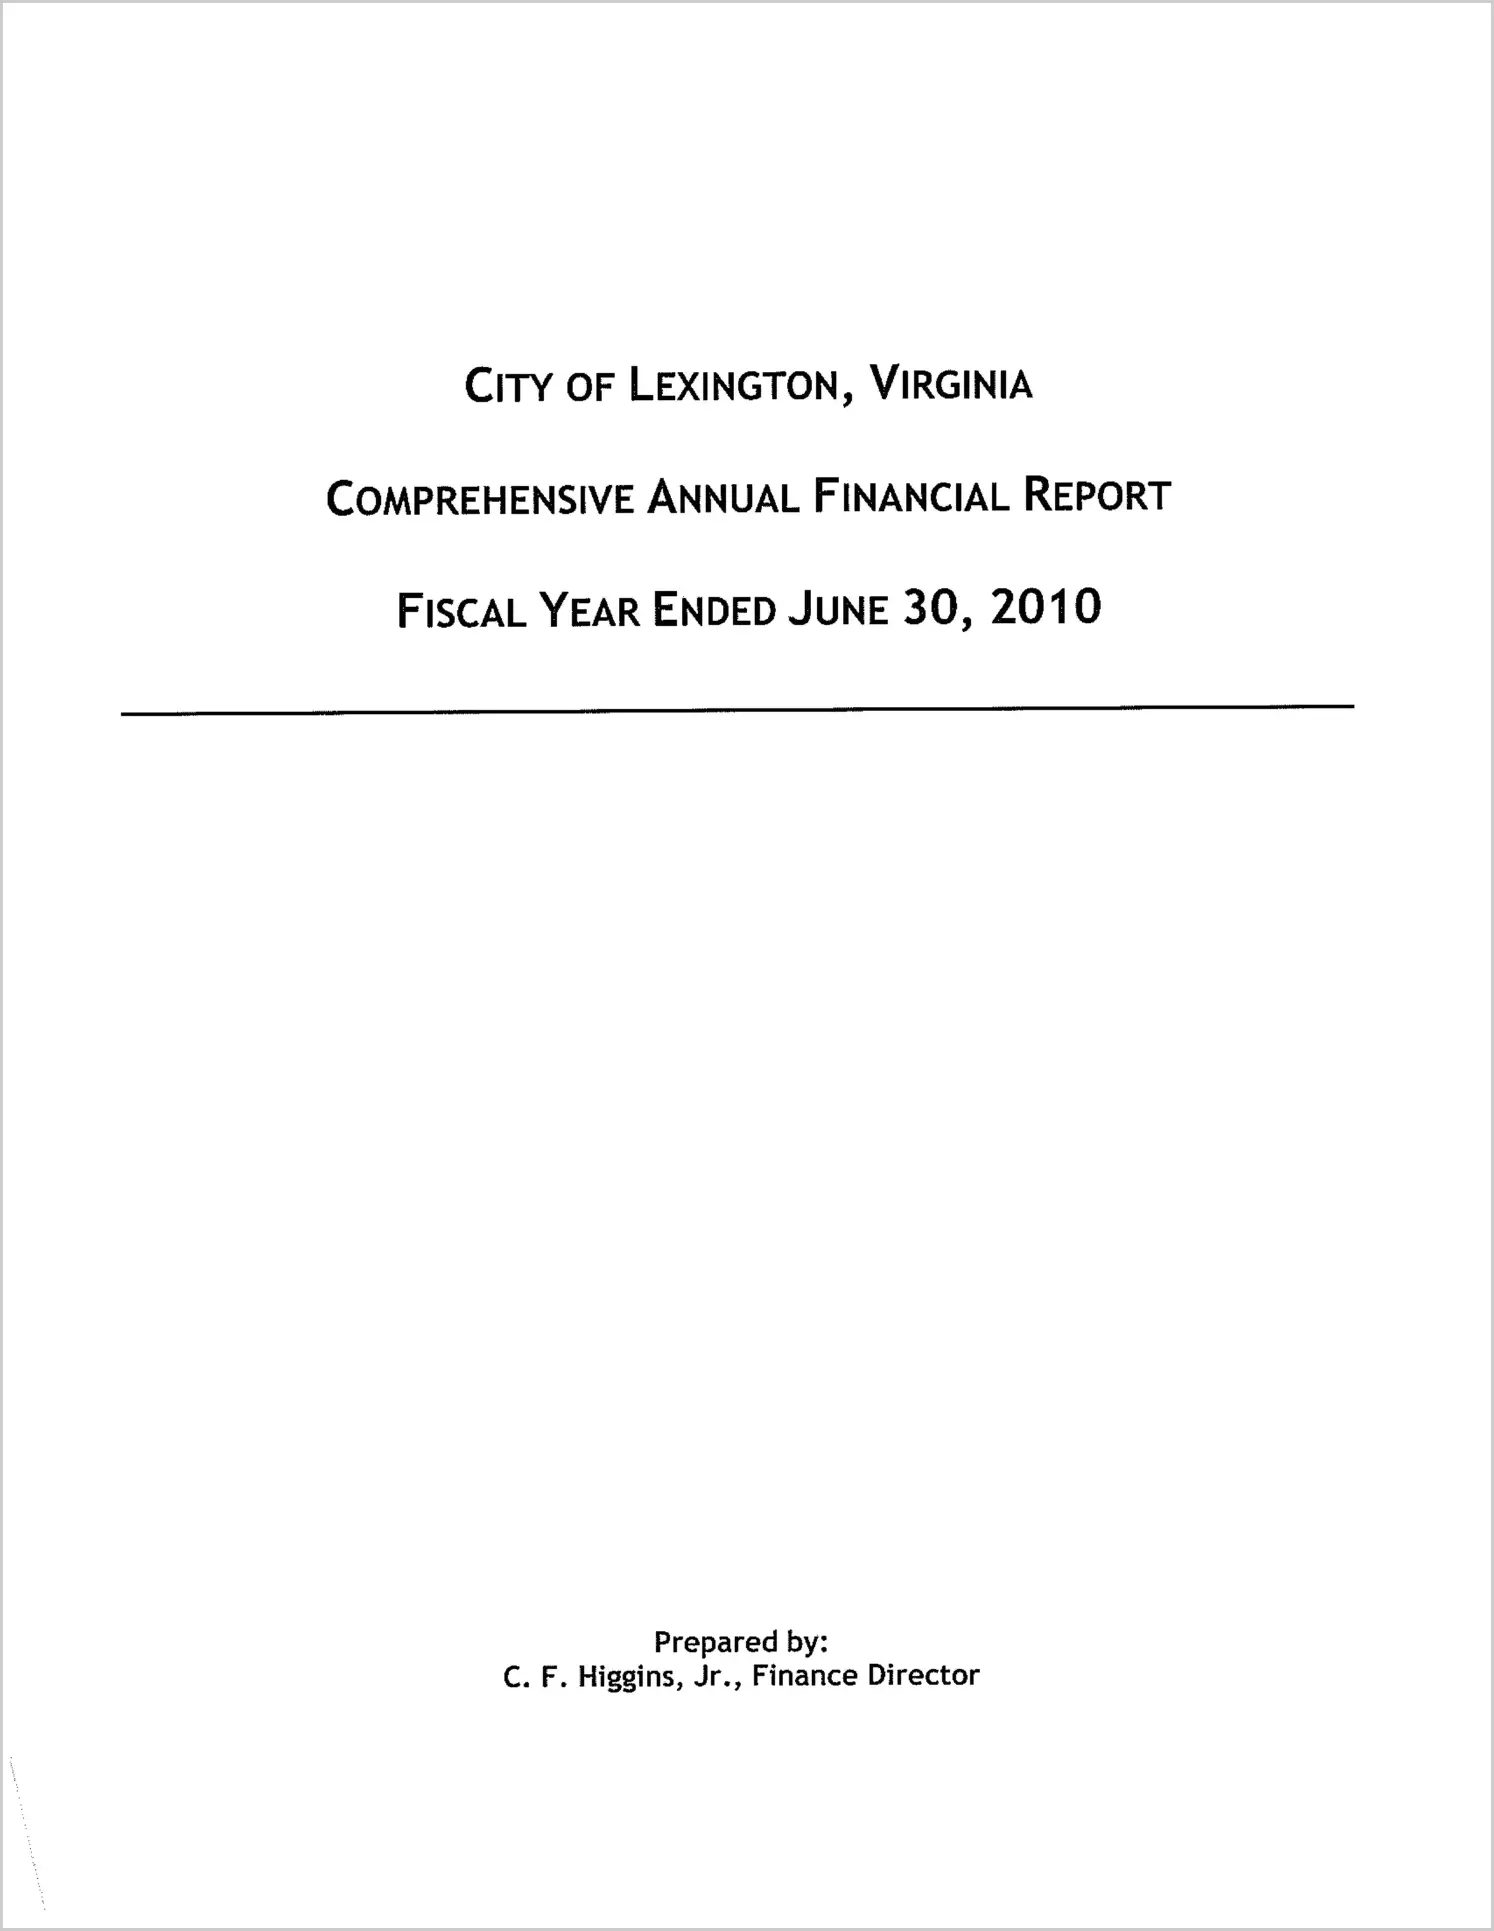 2010 Annual Financial Report for City of Lexington